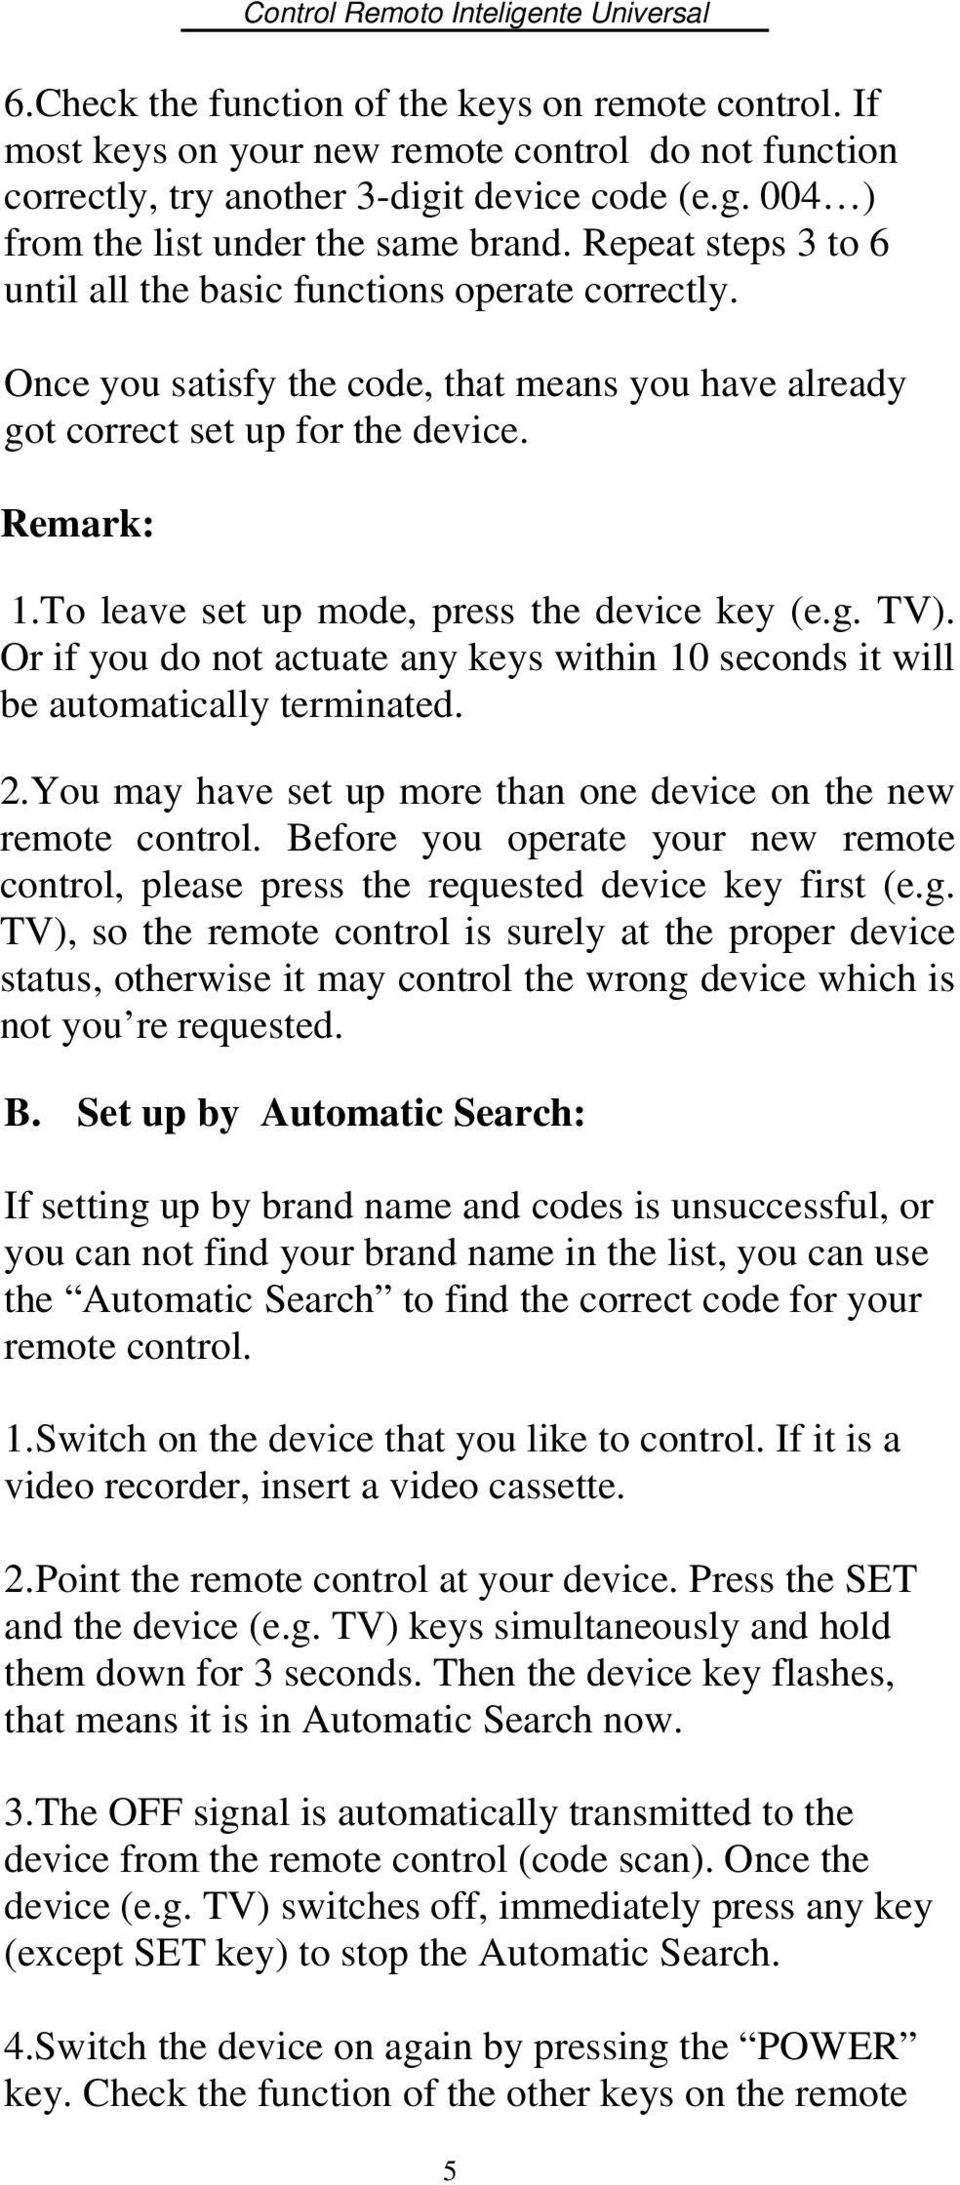 To leave set up mode, press the device key (e.g. TV). Or if you do not actuate any keys within 10 seconds it will be automatically terminated. 2.